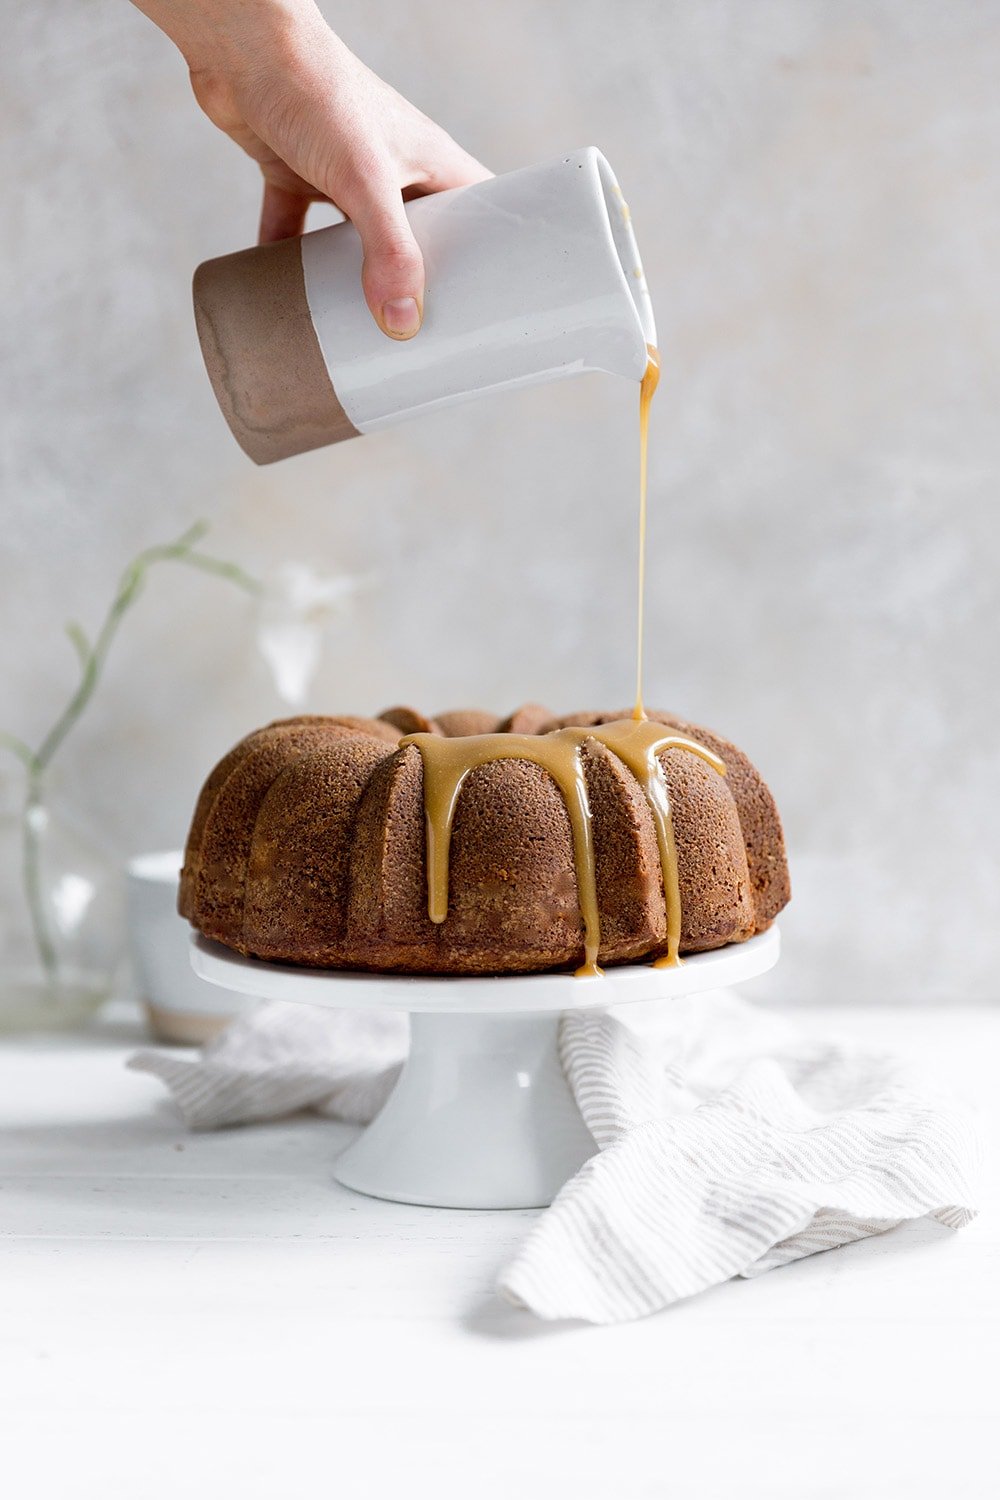 Butterscotch Bundt Cake features a brown sugar sour cream cake drizzled with a thick butterscotch icing for a simple and beautiful fall dessert.